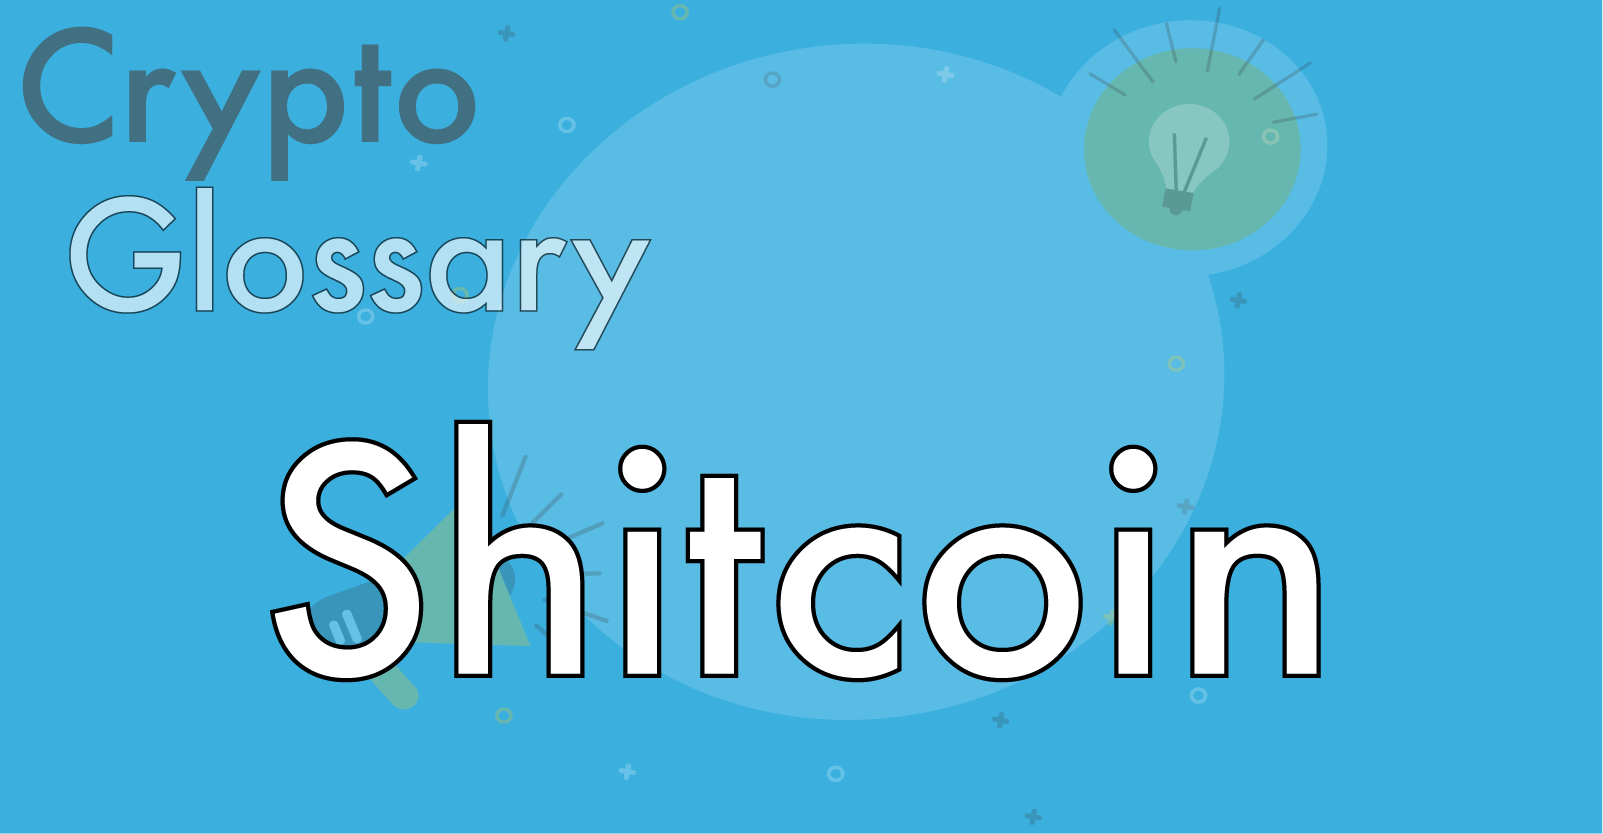 What is a Shitcoin and which coins are labeled as such?